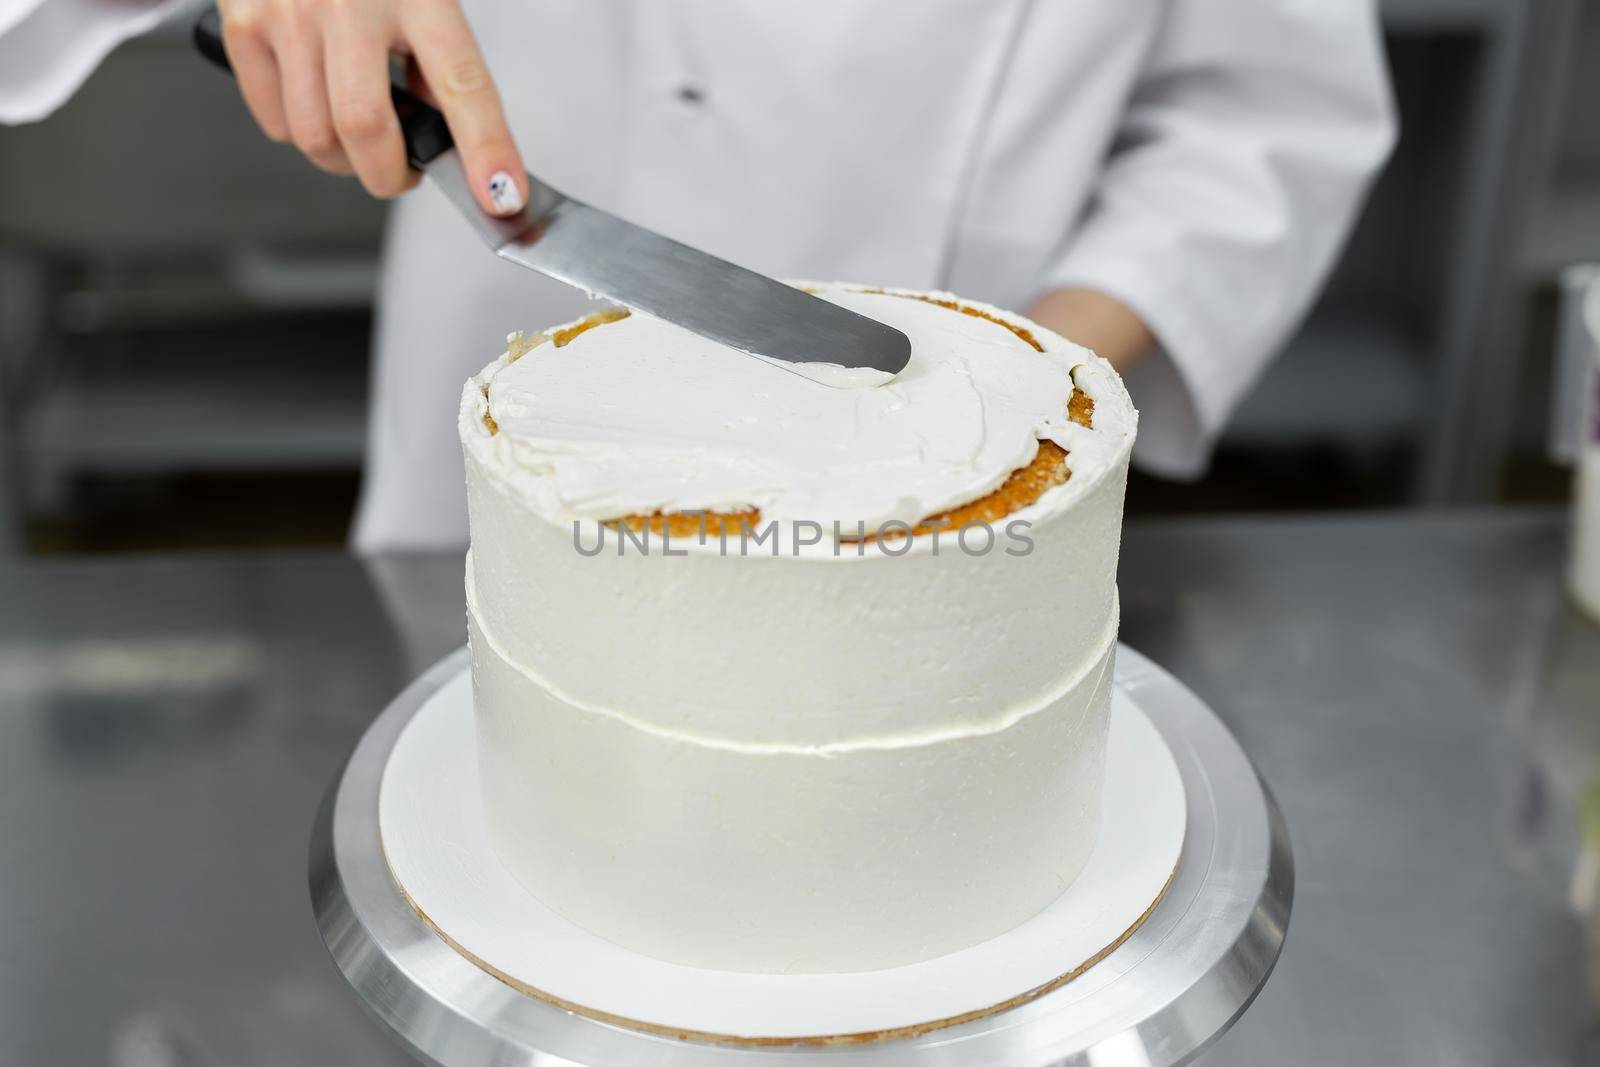 The pastry chef levels the cake with cream. by StudioPeace